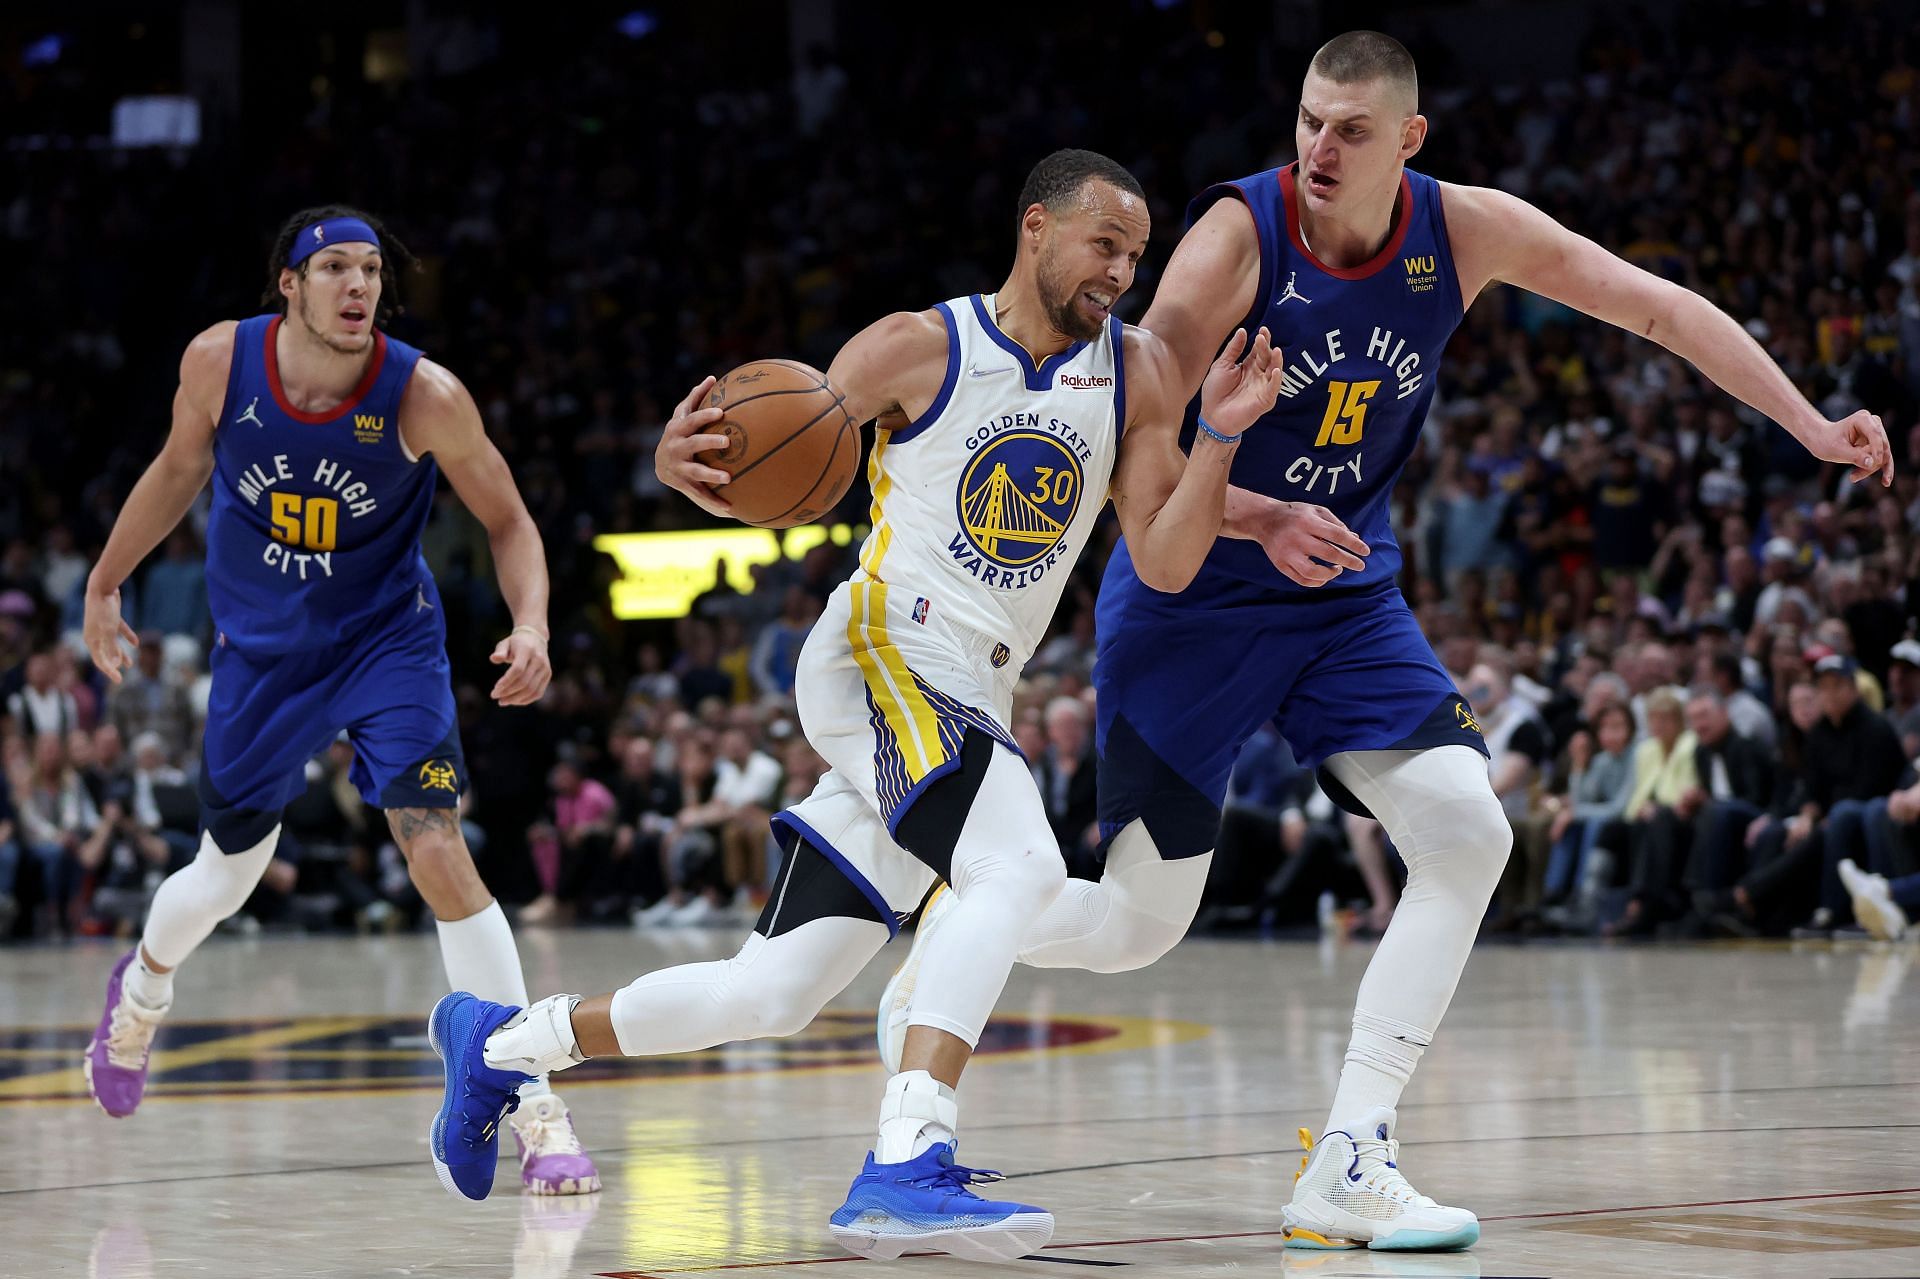 Steph Curry of the Golden State Warriors drives past Nikola Jokic of the Denver Nuggets.